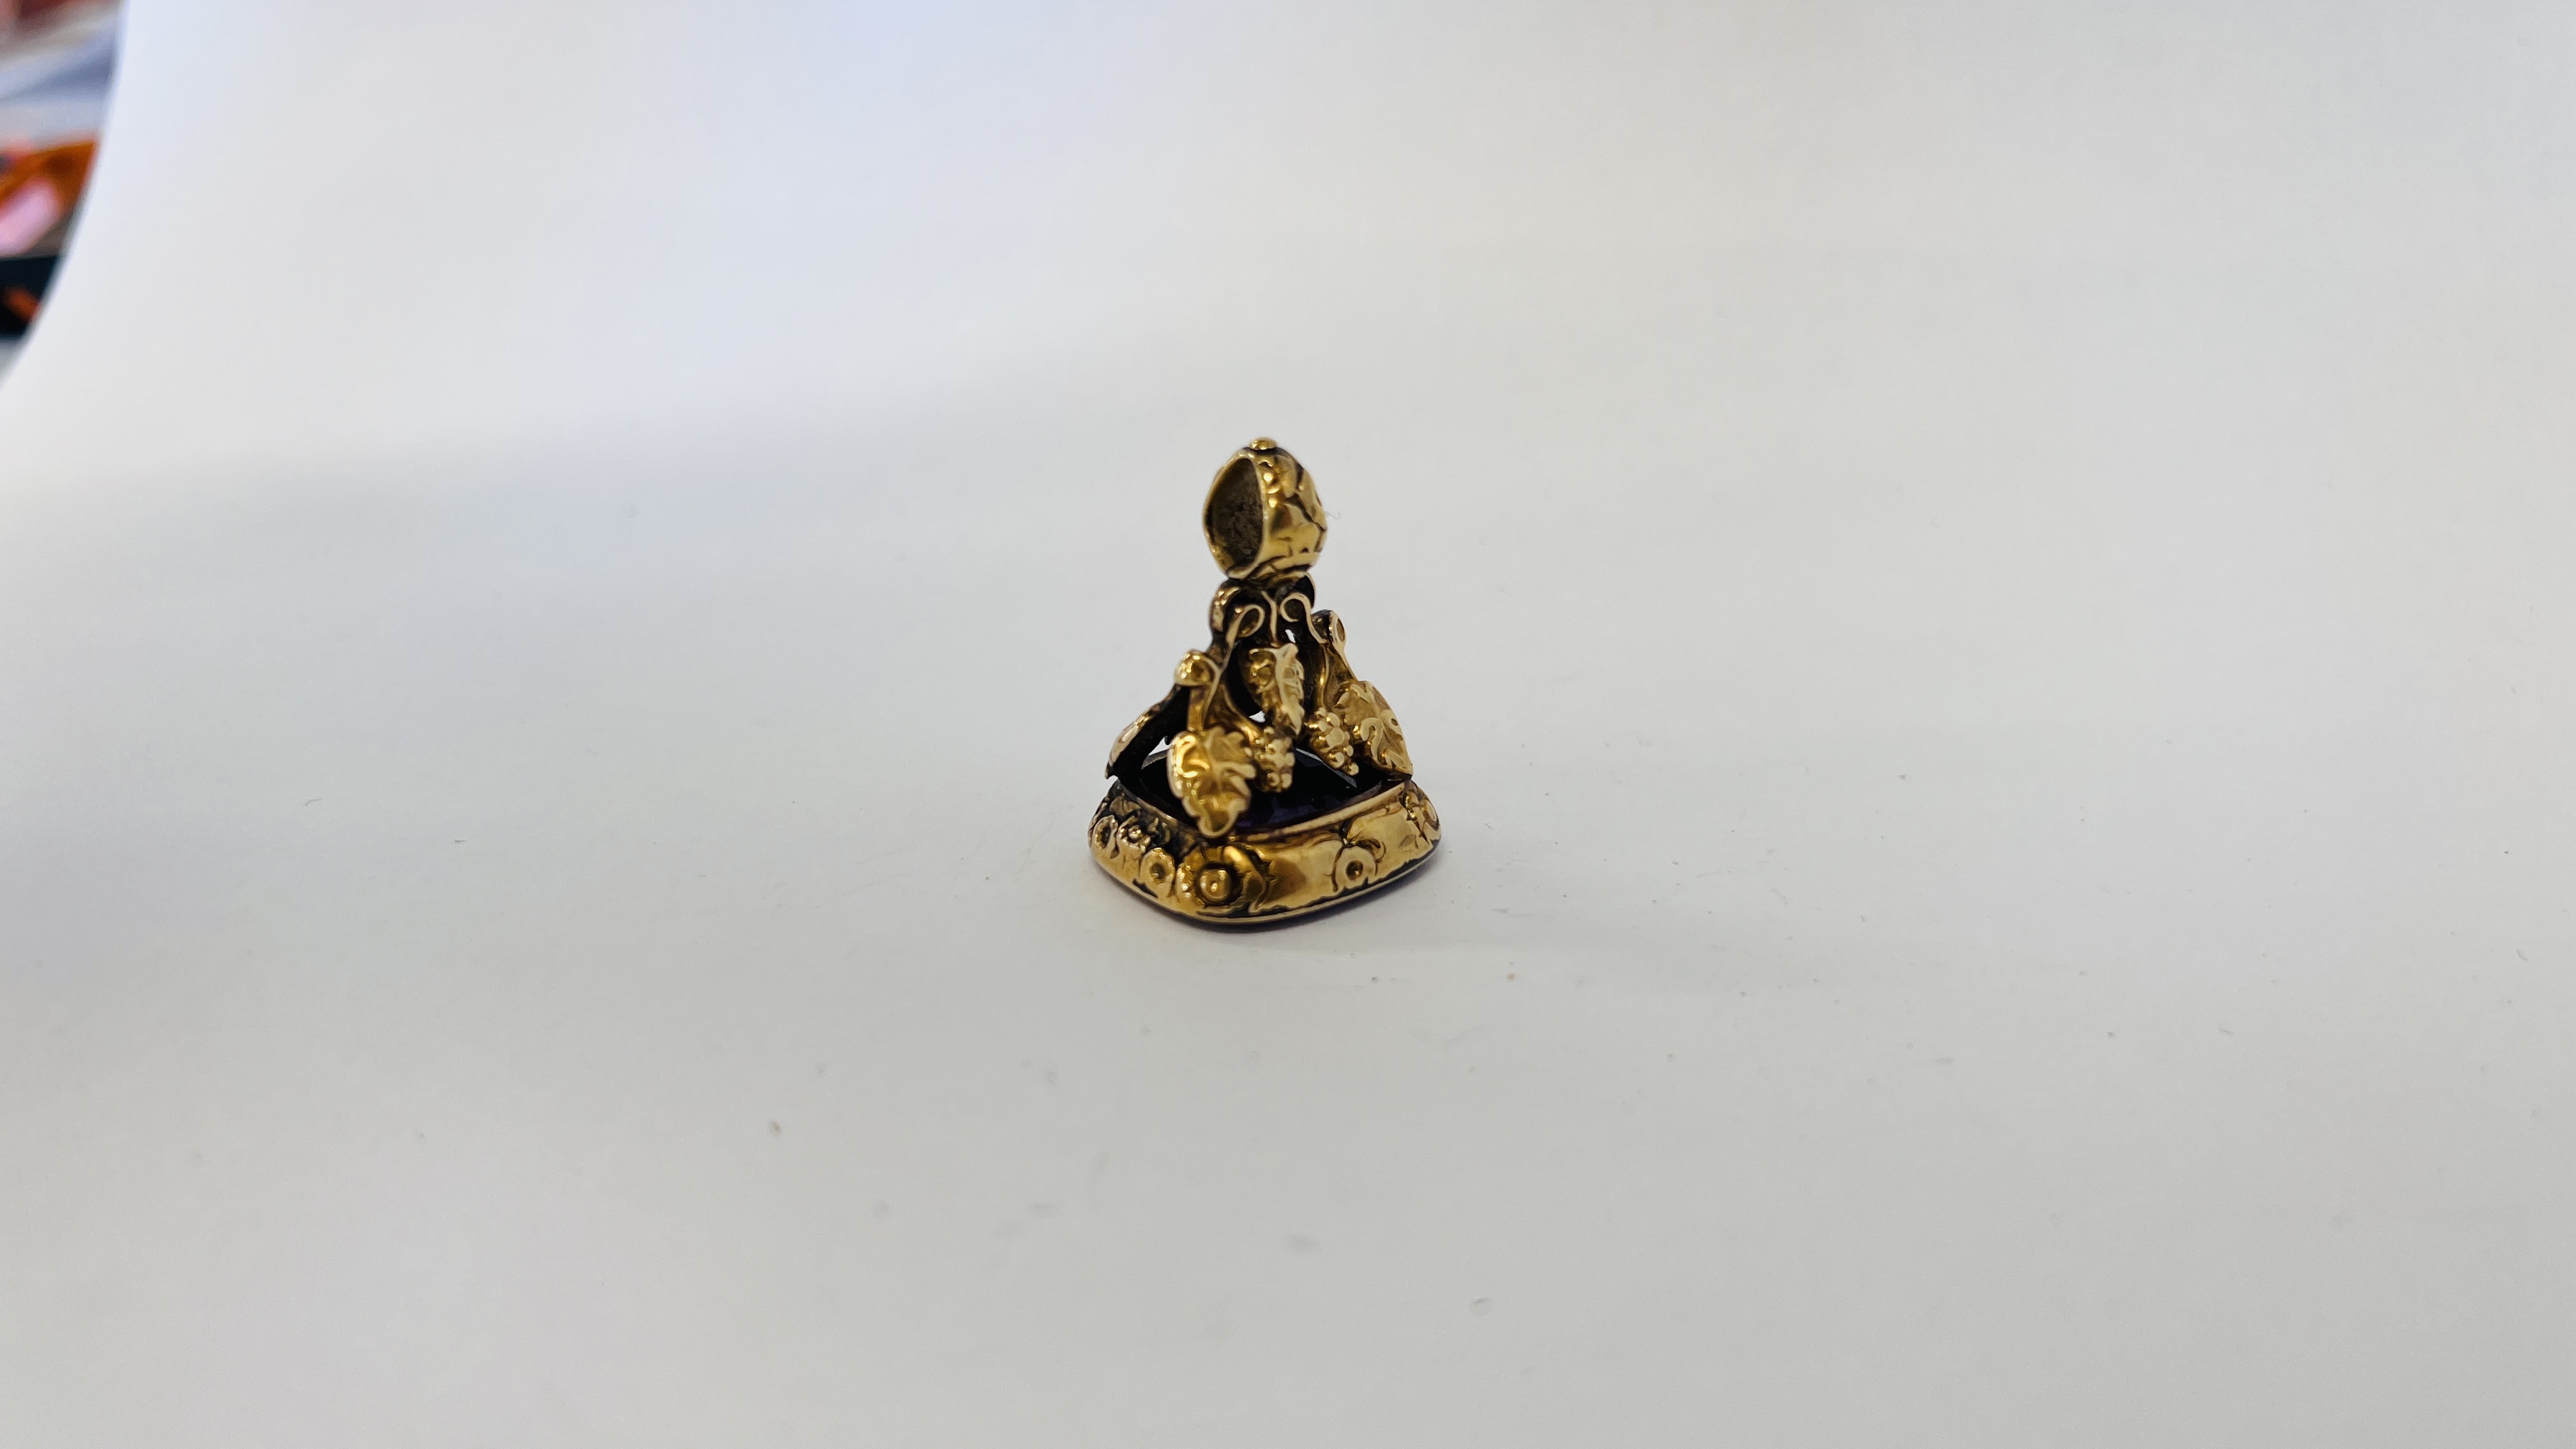 AN ANTIQUE GILT METAL SEAL PENDANT "I'LL BE WARY". - Image 2 of 7